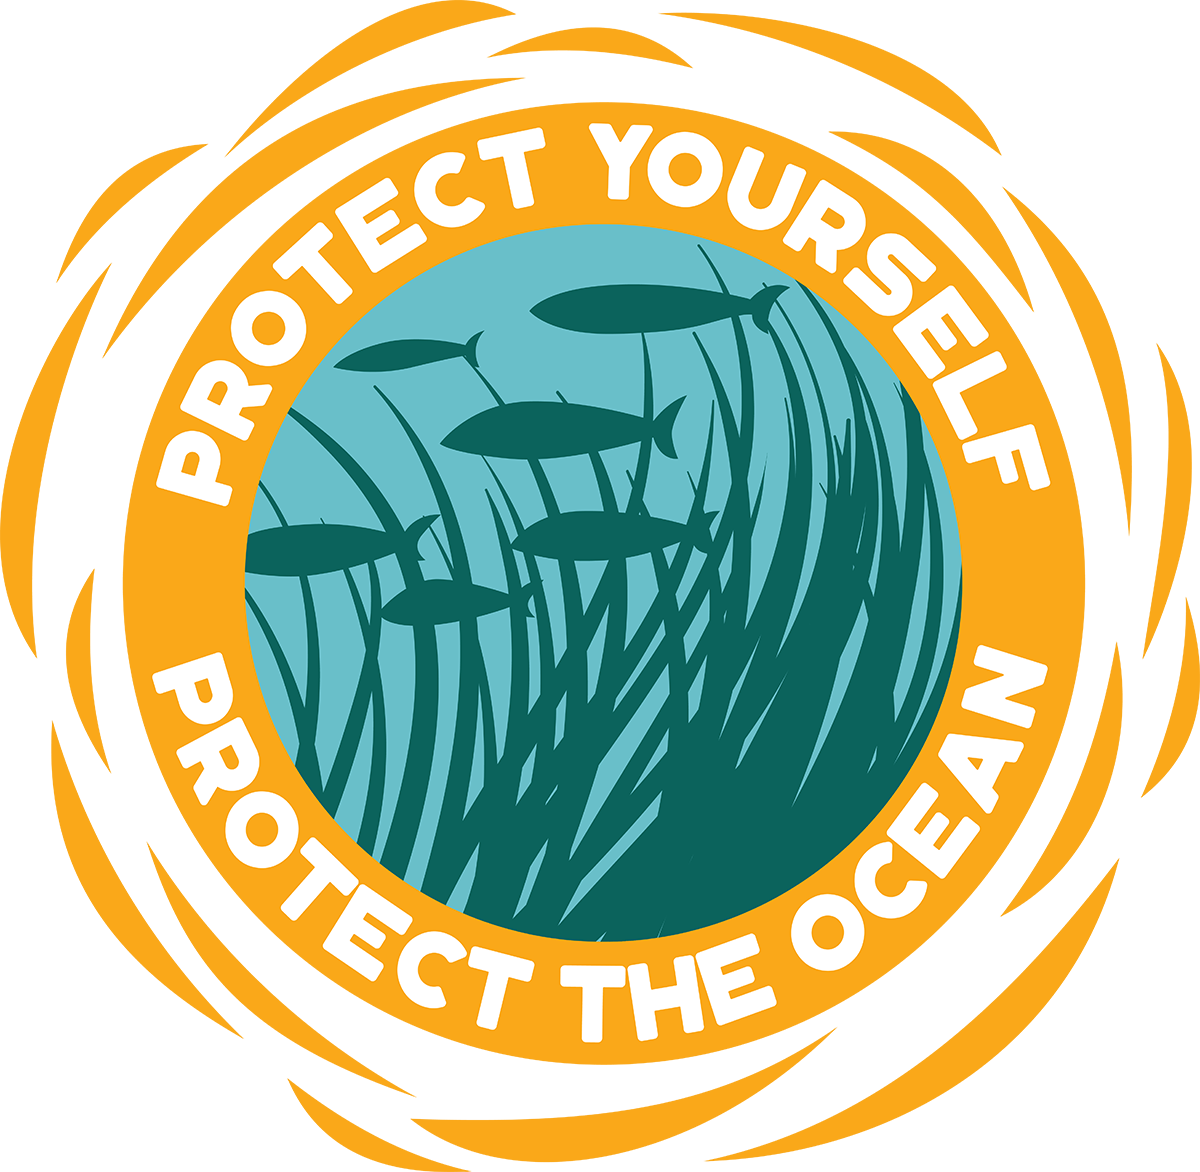 Protect Yourself Protect the Ocean Campaign Graphic